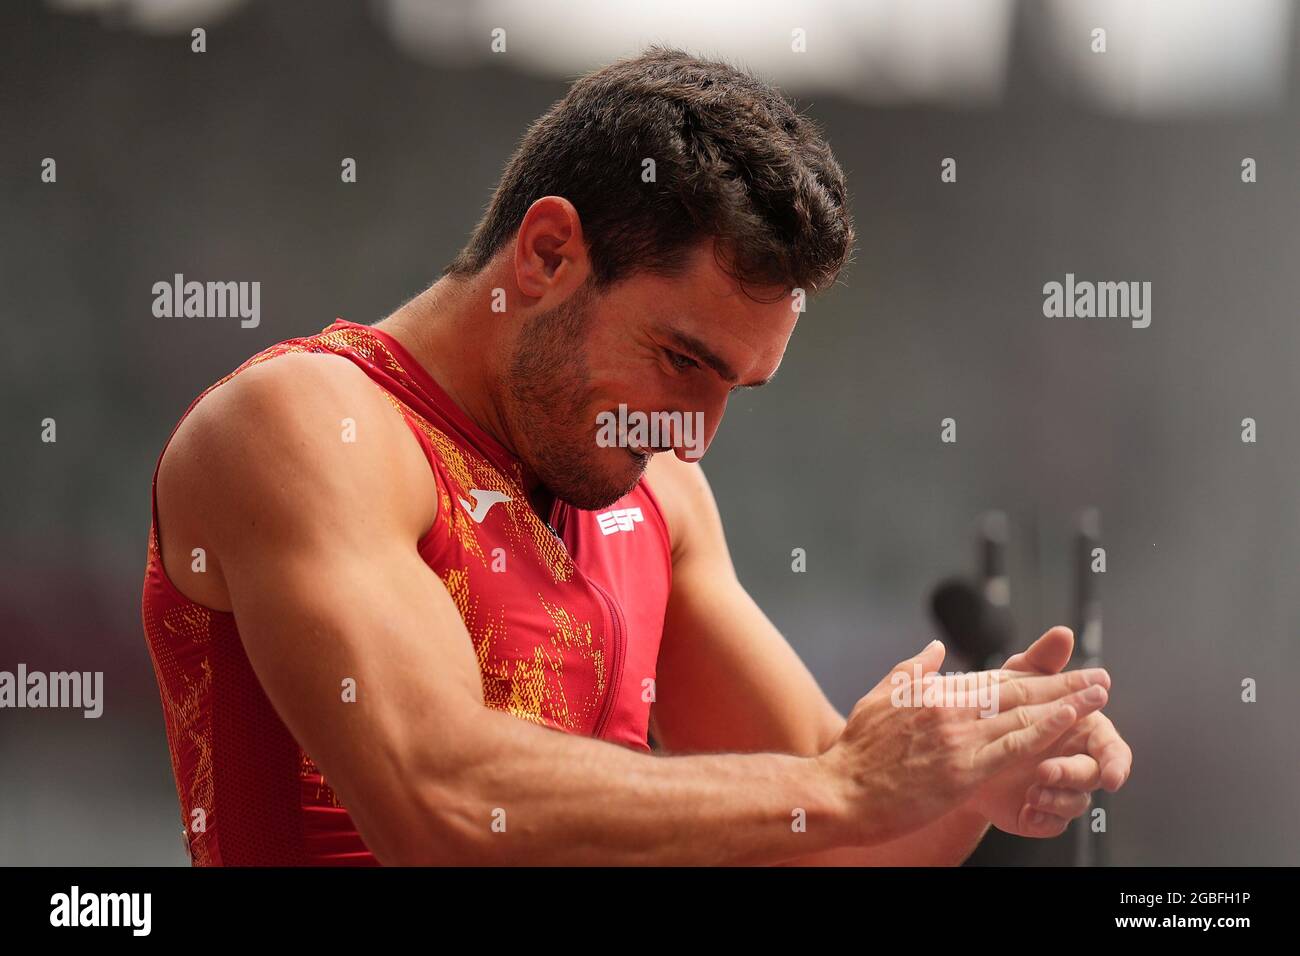 Tokyo, Japan. 4th Aug, 2021. Jorge Urena of Spain reacts after the Men's Decathlon 100m Heat at the Tokyo 2020 Olympic Games in Tokyo, Japan, Aug. 4, 2021. Credit: Lui Siu Wai/Xinhua/Alamy Live News Stock Photo